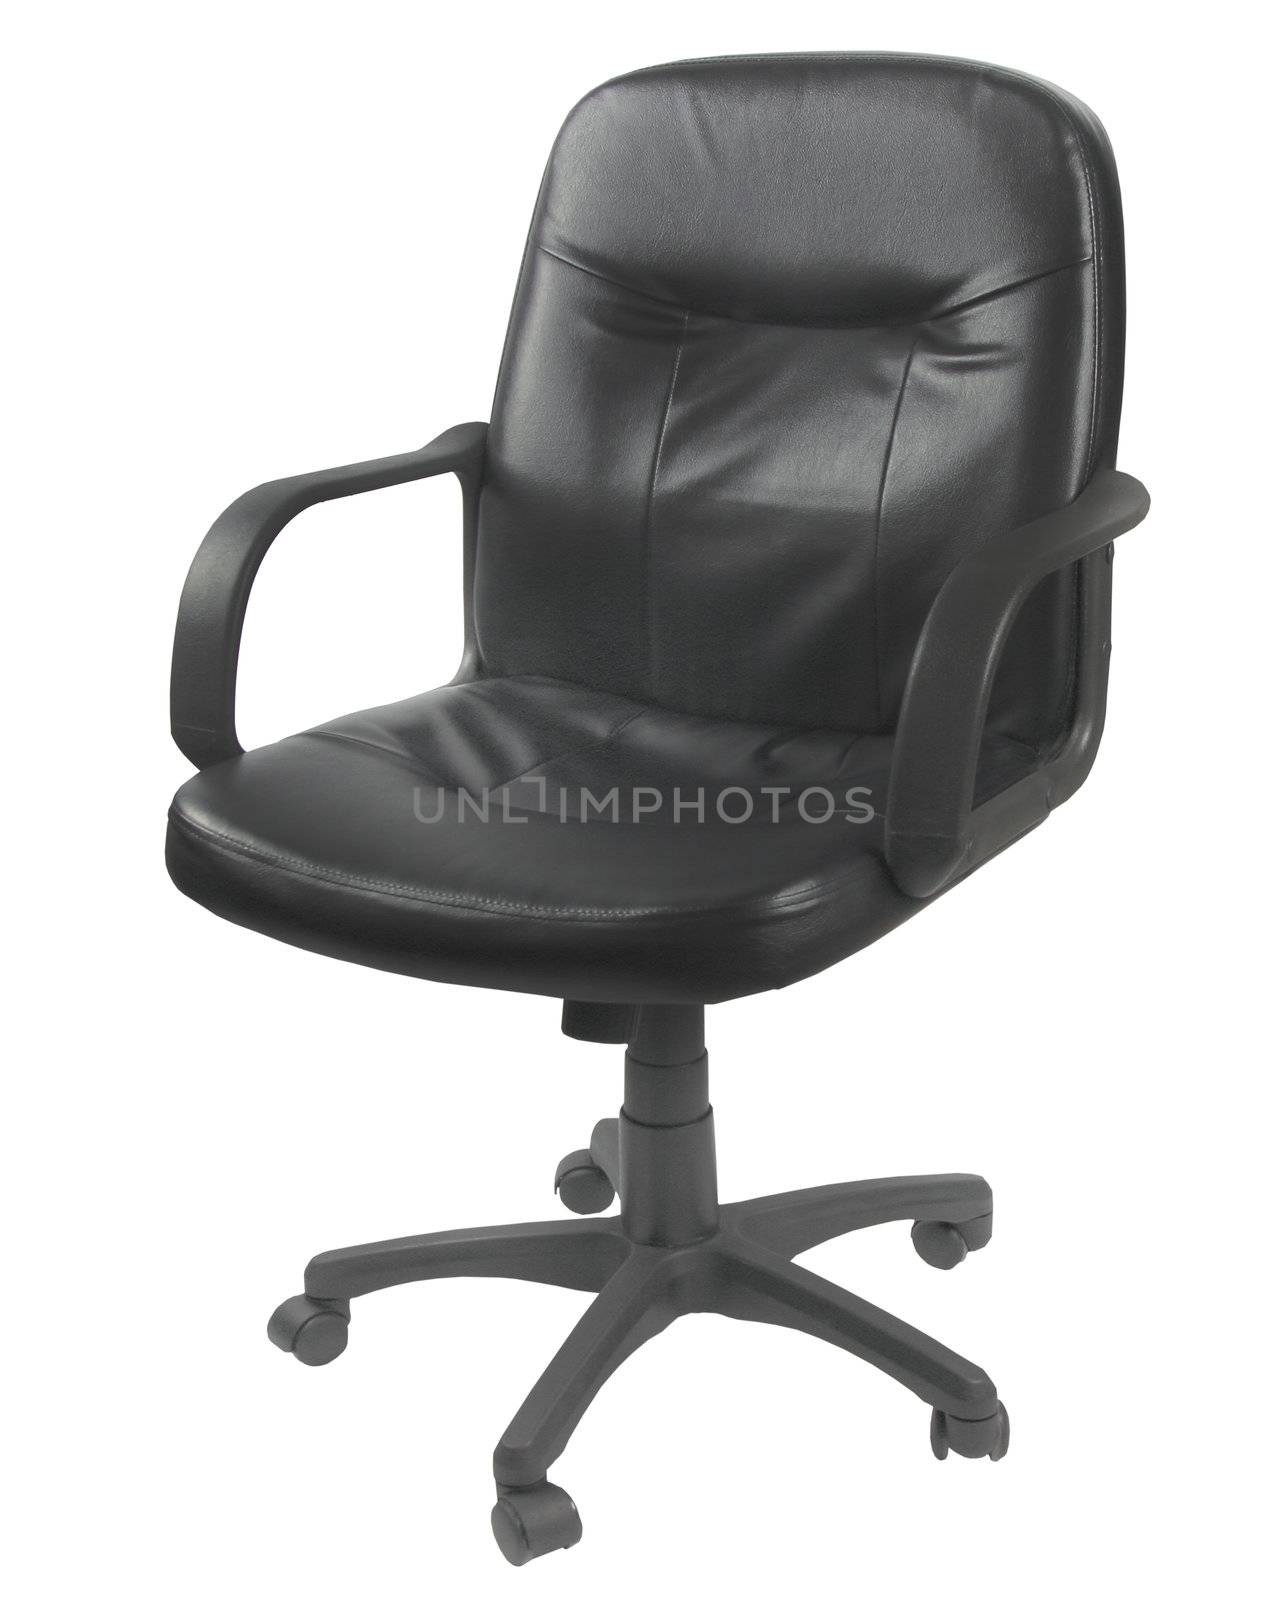 Office leather chair on white background